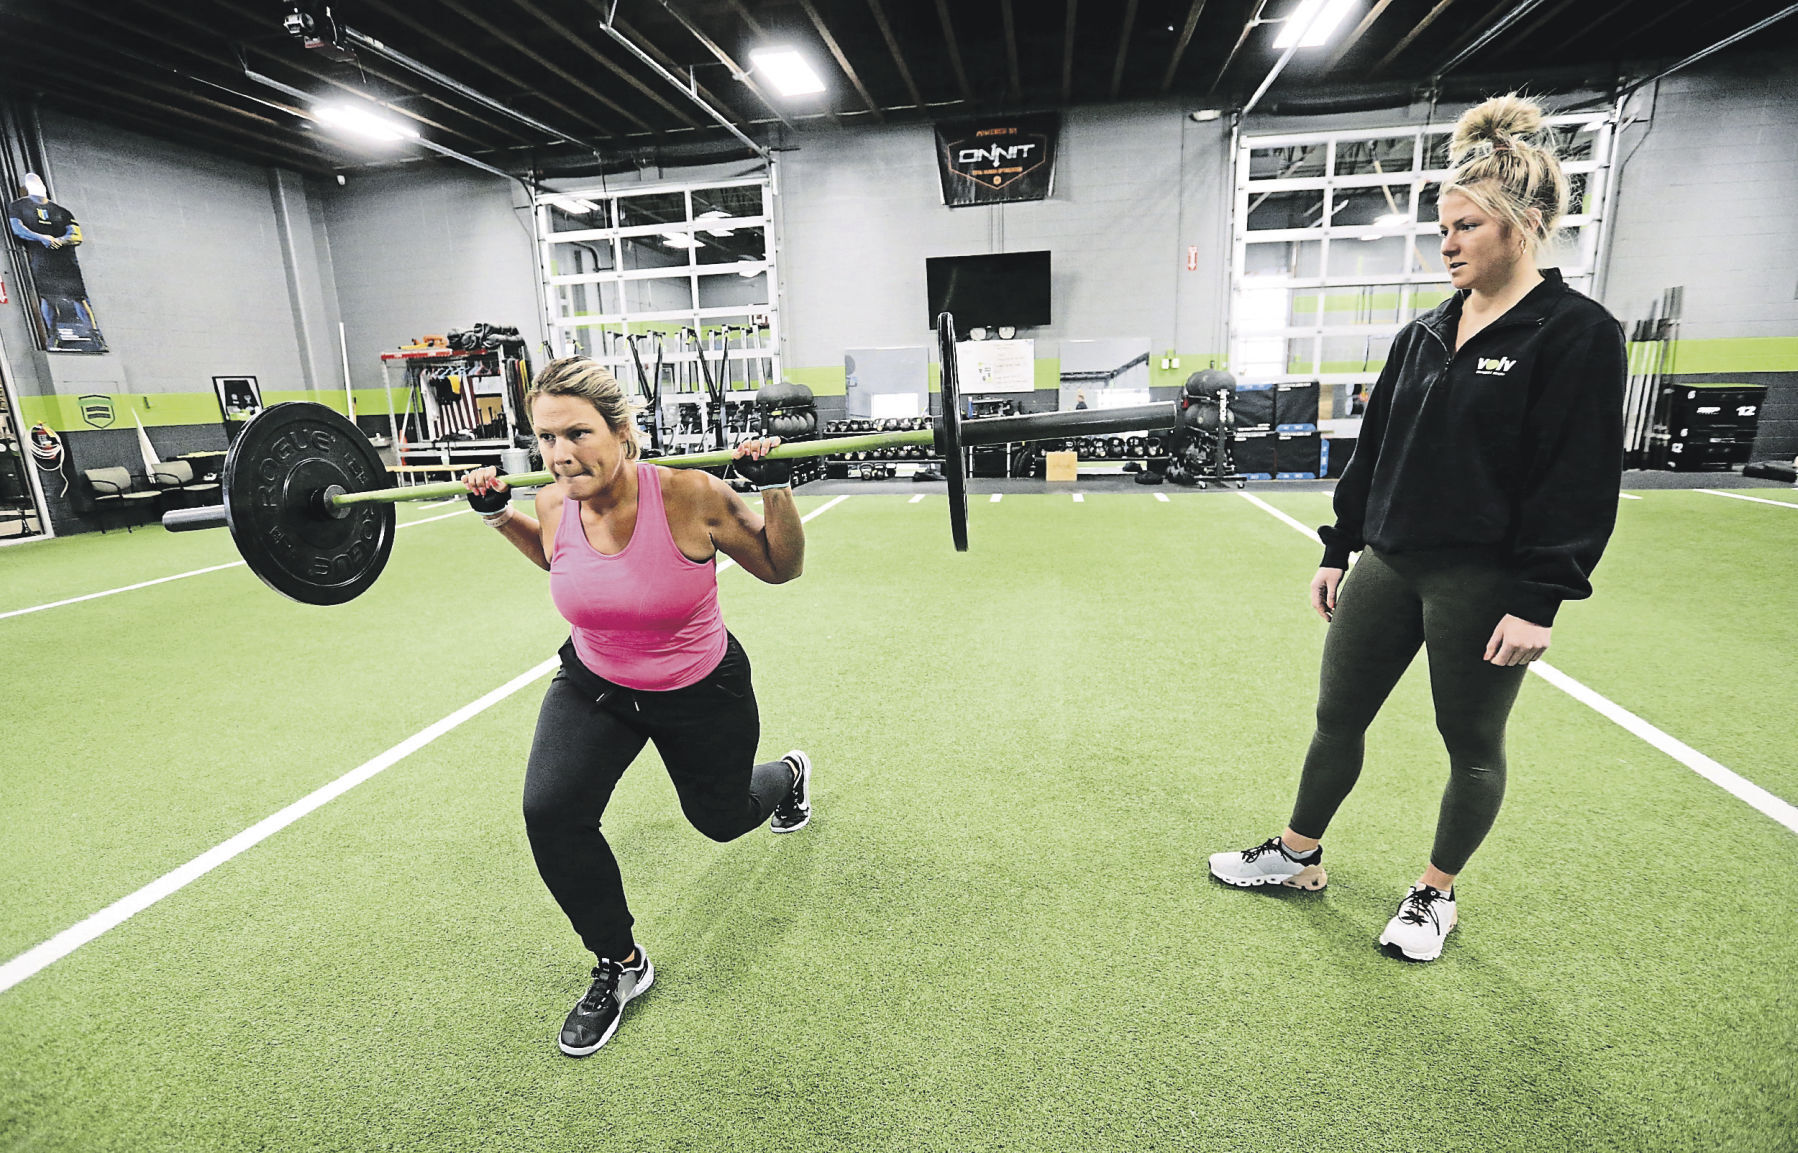 Personal trainer Cassie Hamer (right) works with Vanessa Cahill, of Maquoketa, Iowa, at Volv Fitness.    PHOTO CREDIT: JESSICA REILLY